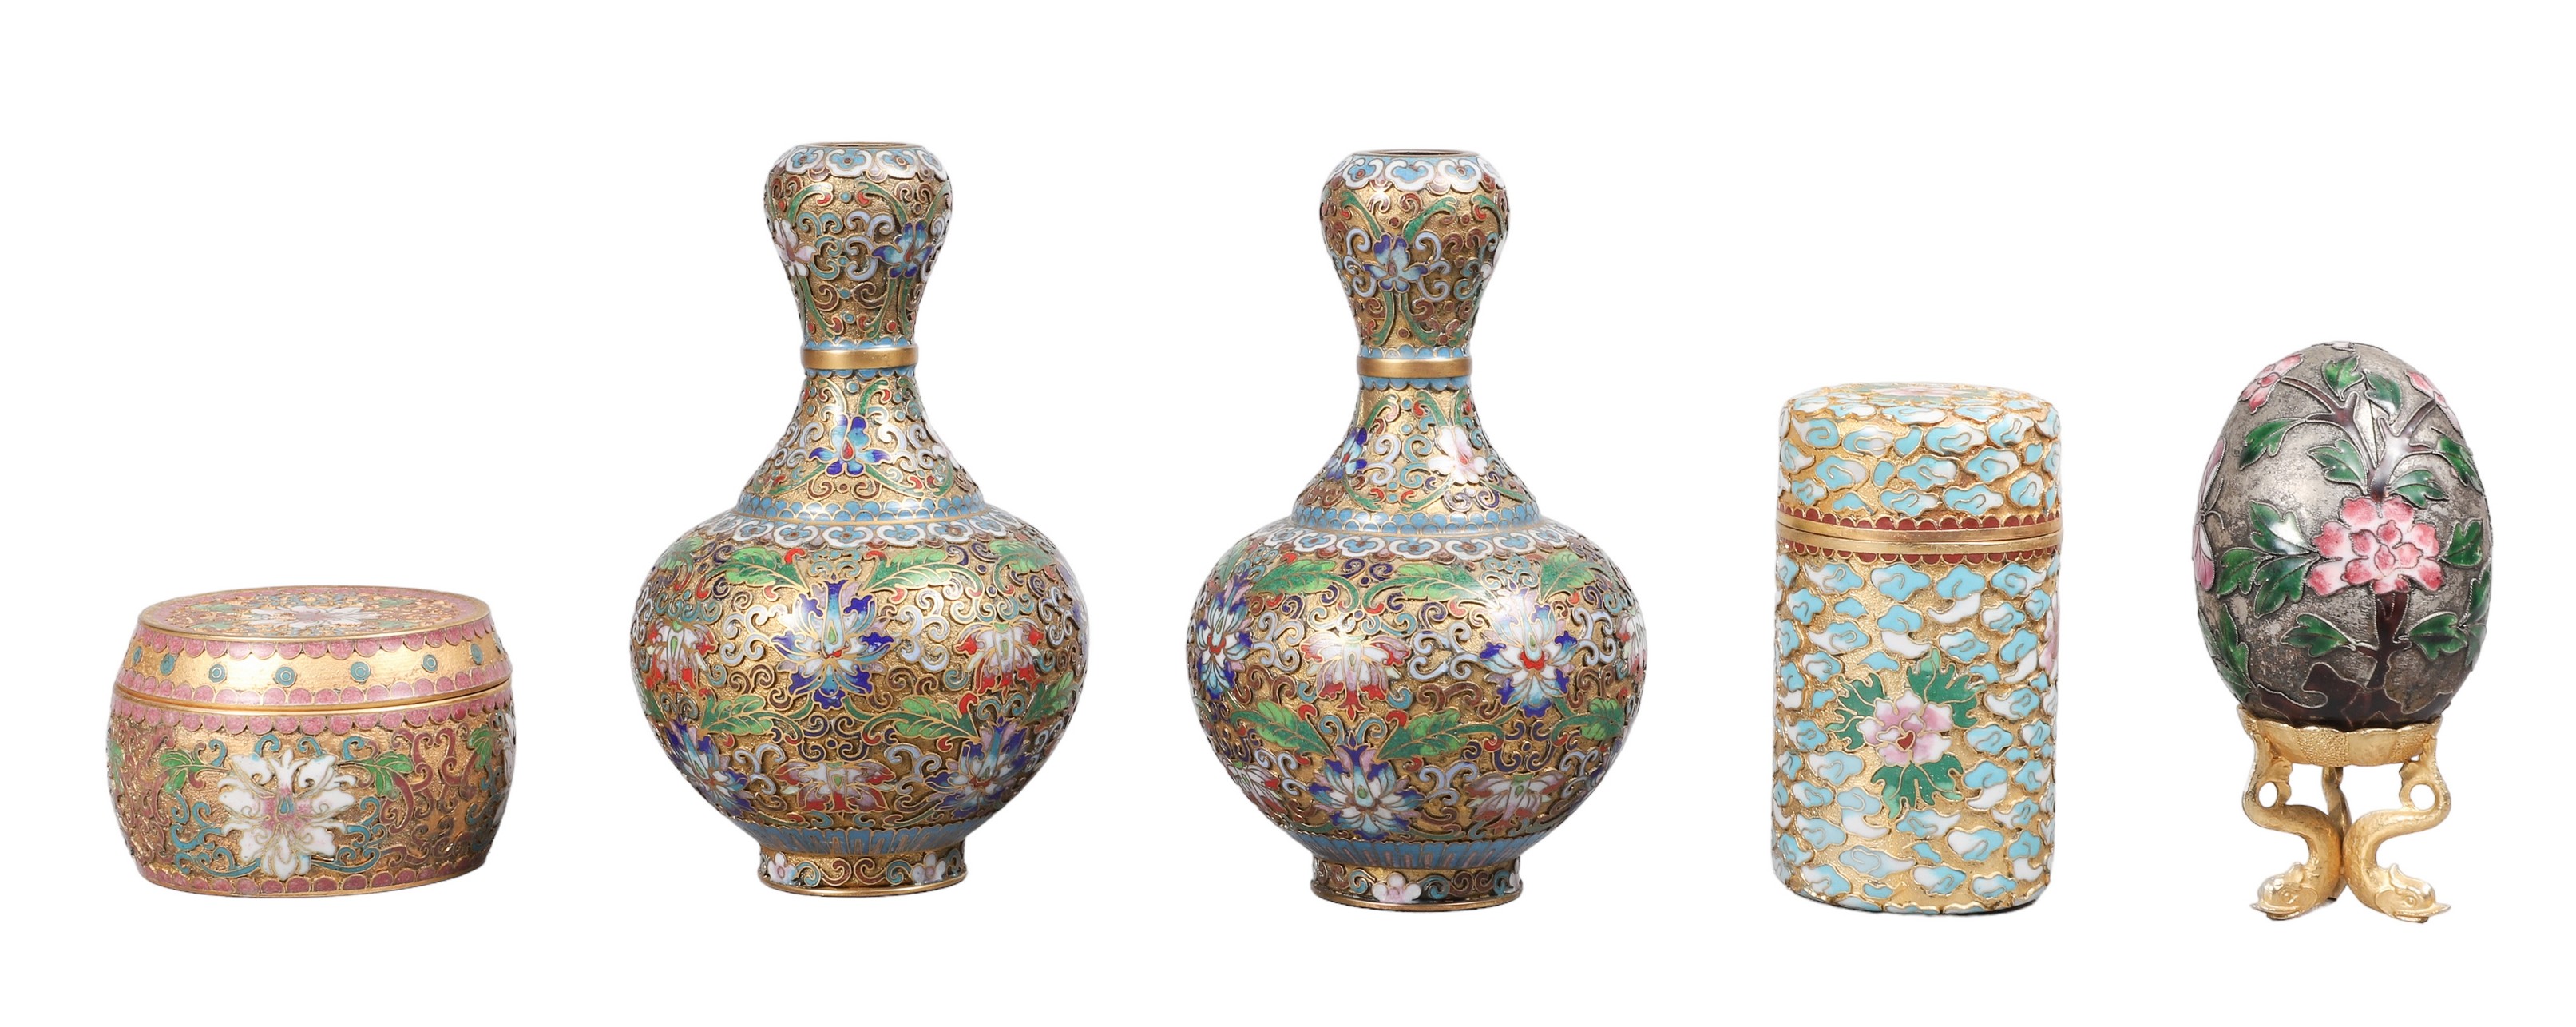  5 Pcs Chinese cloisonne including 2e143f